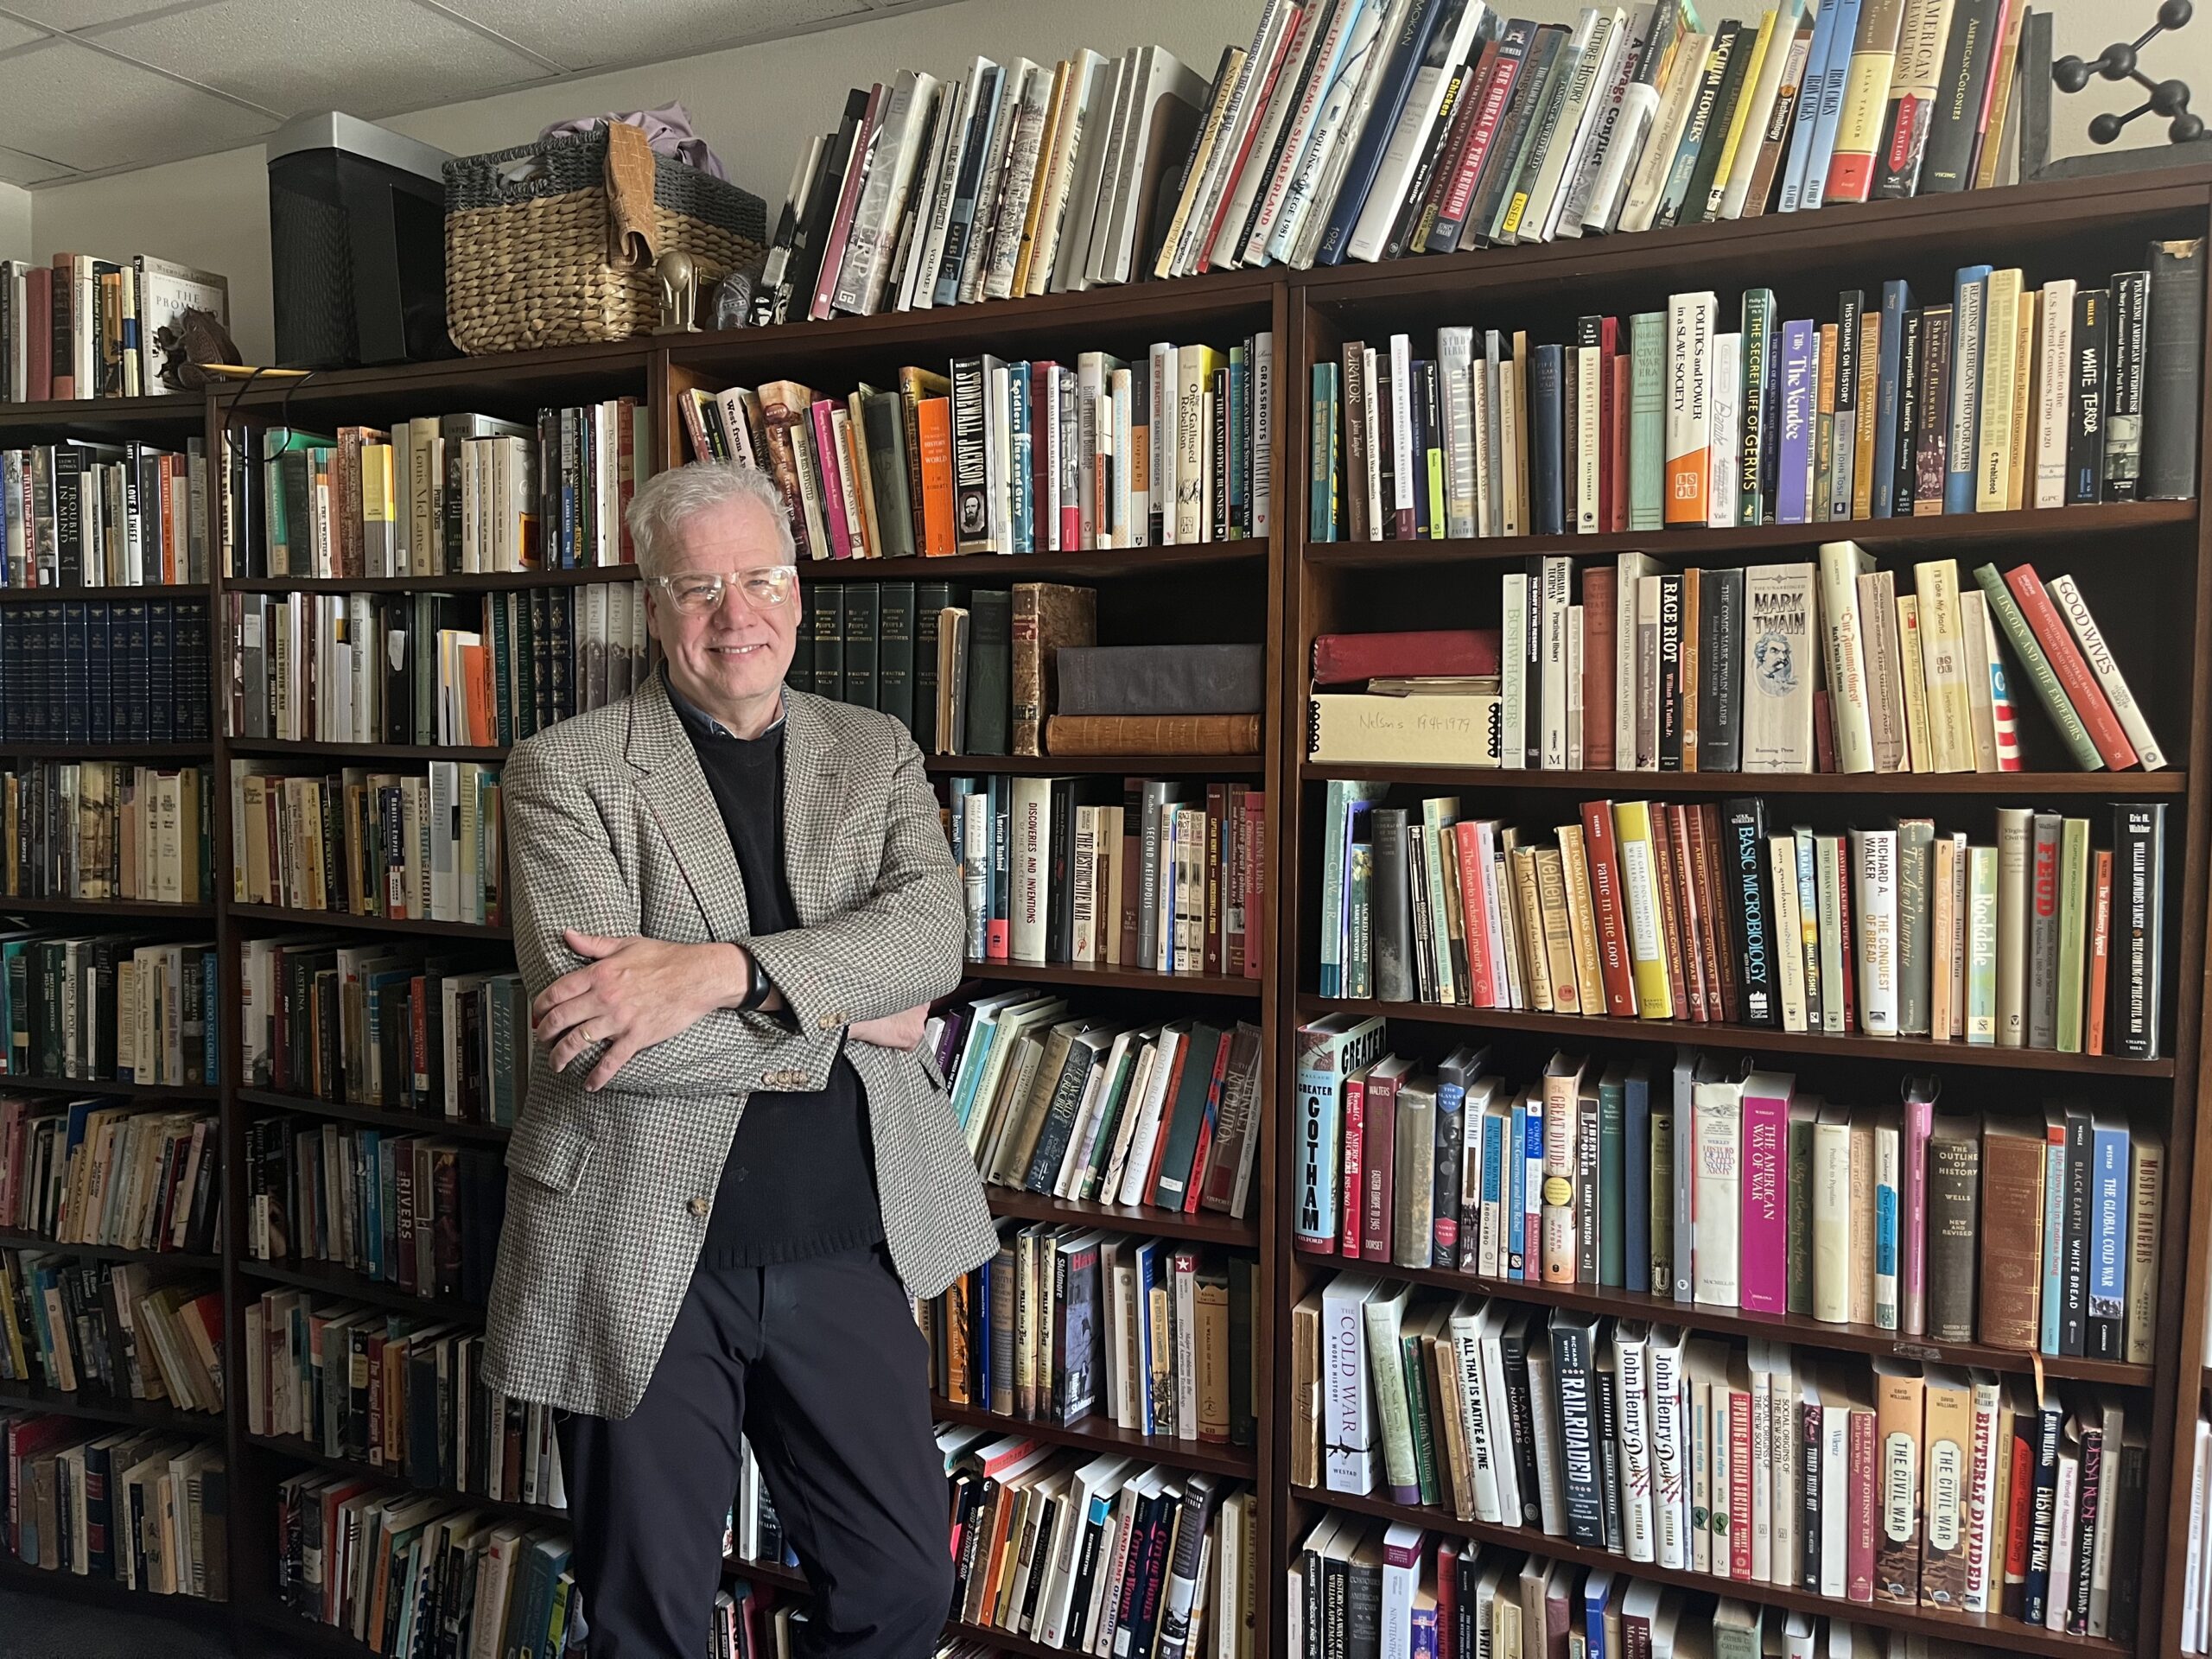 Scott Reynolds Nelson stands with his arms crosse in front of a large bookcase in his office